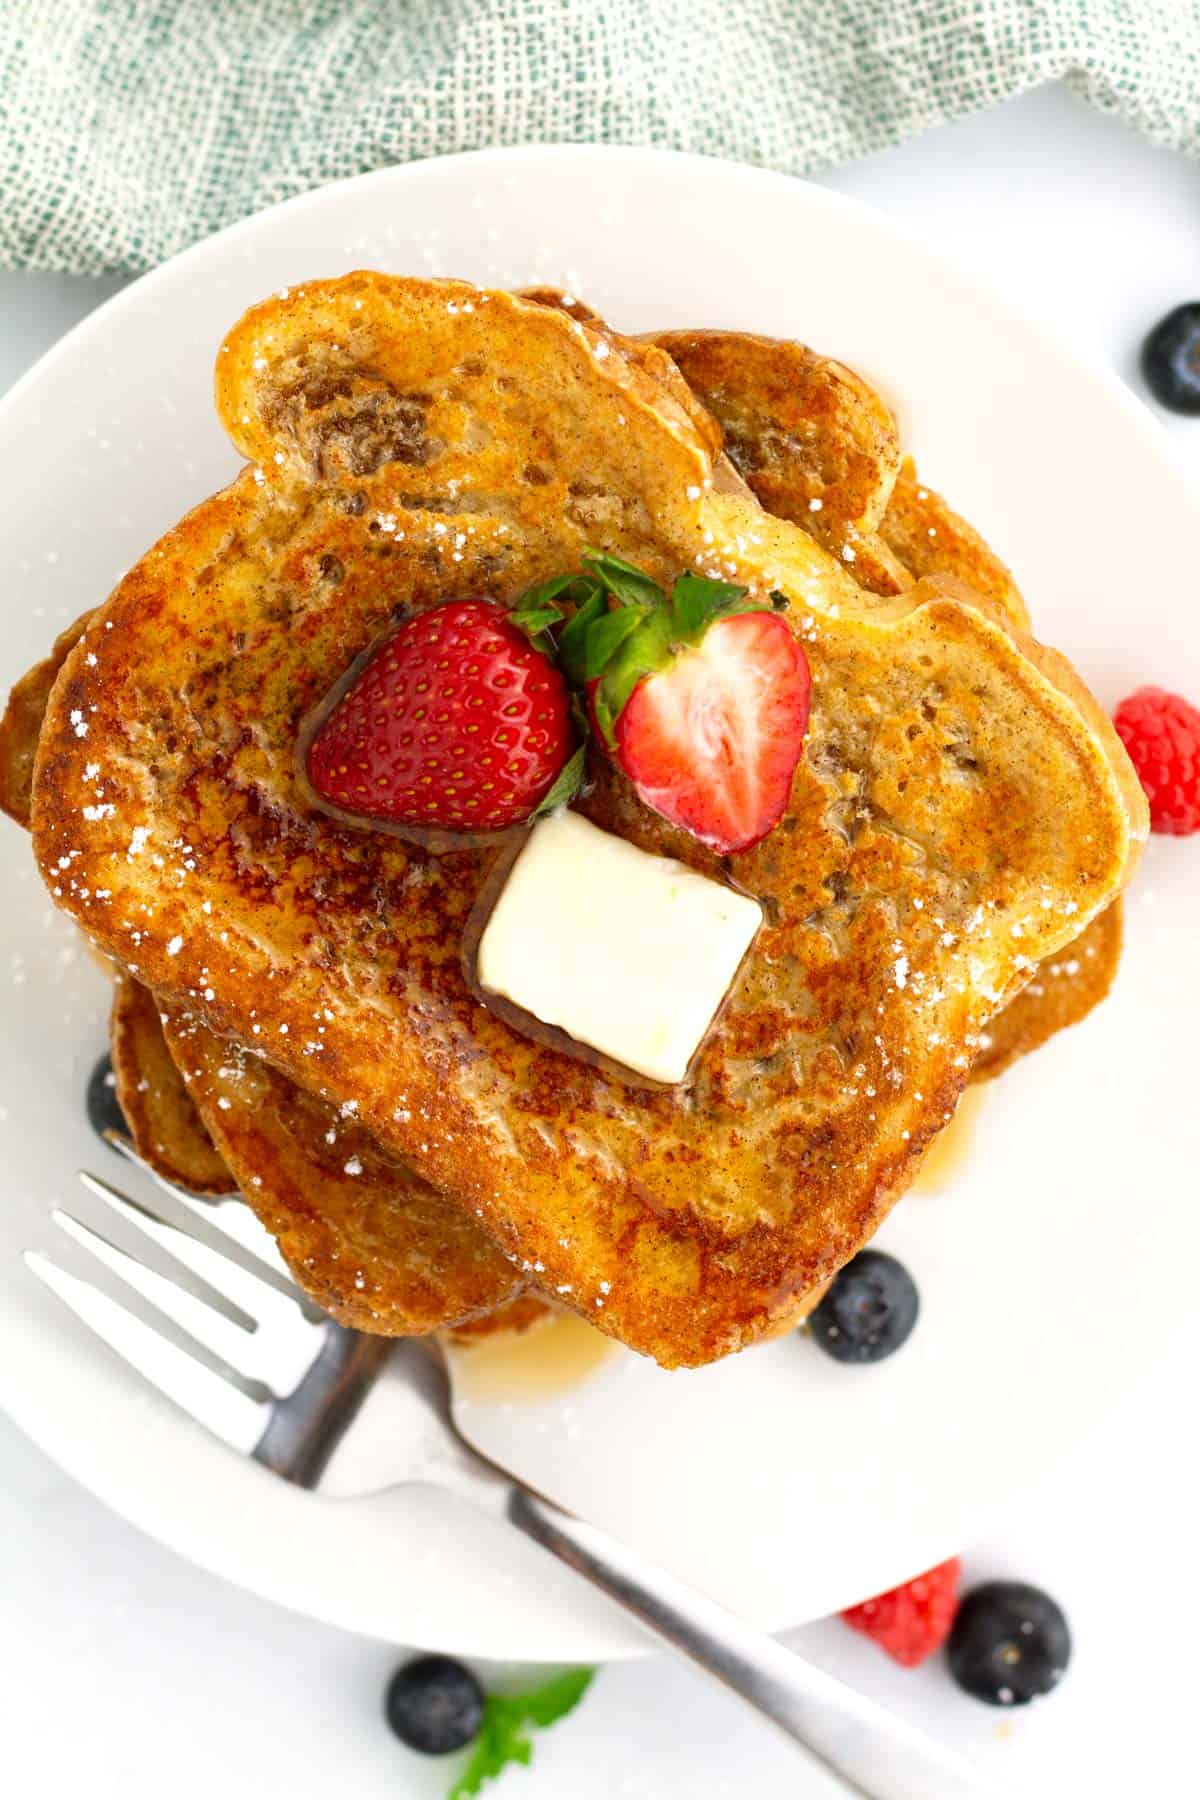 Pieces of simple french toast stacked together on a plate with fresh berries.